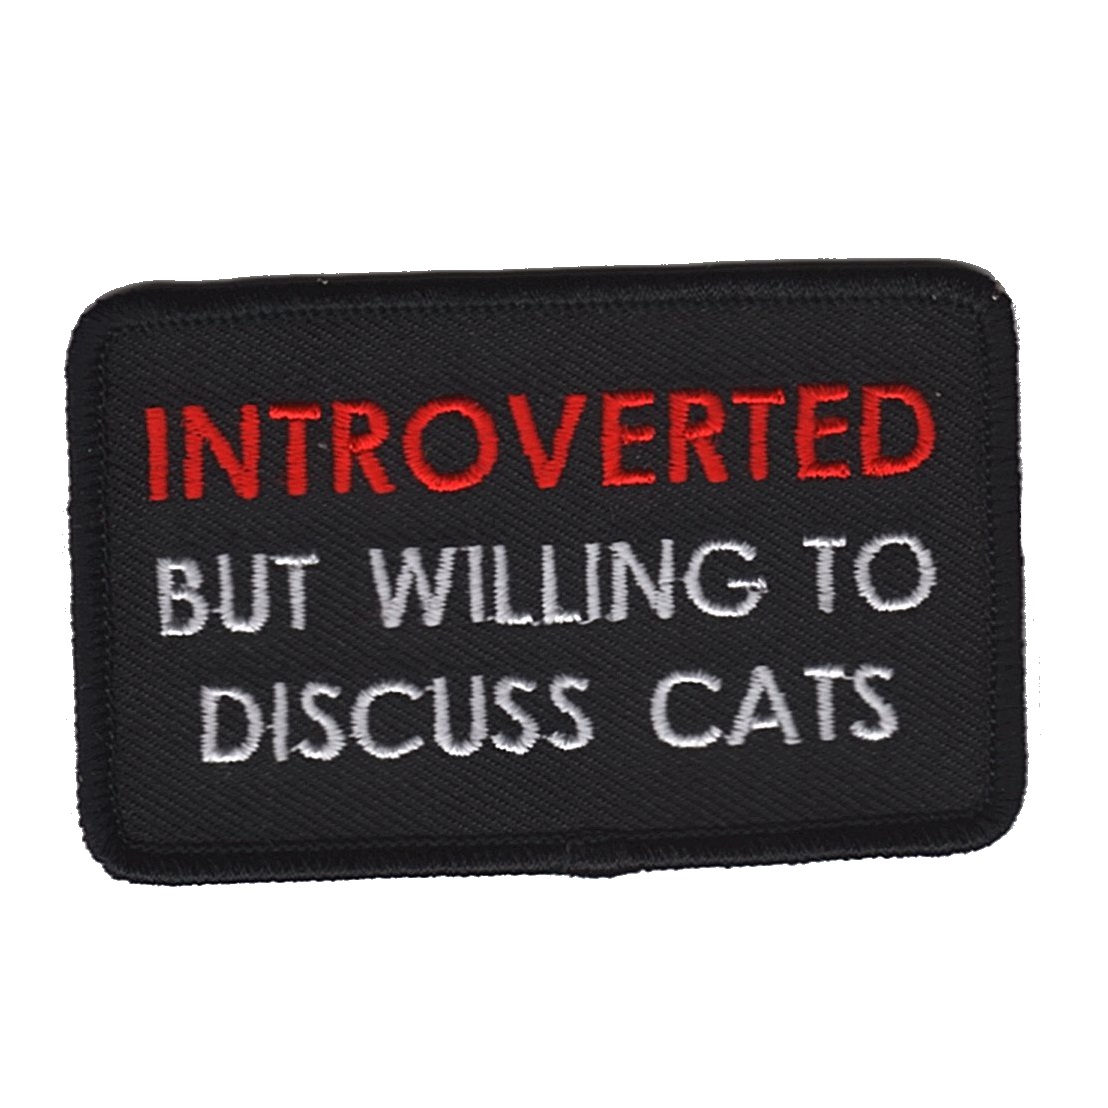 Introverted